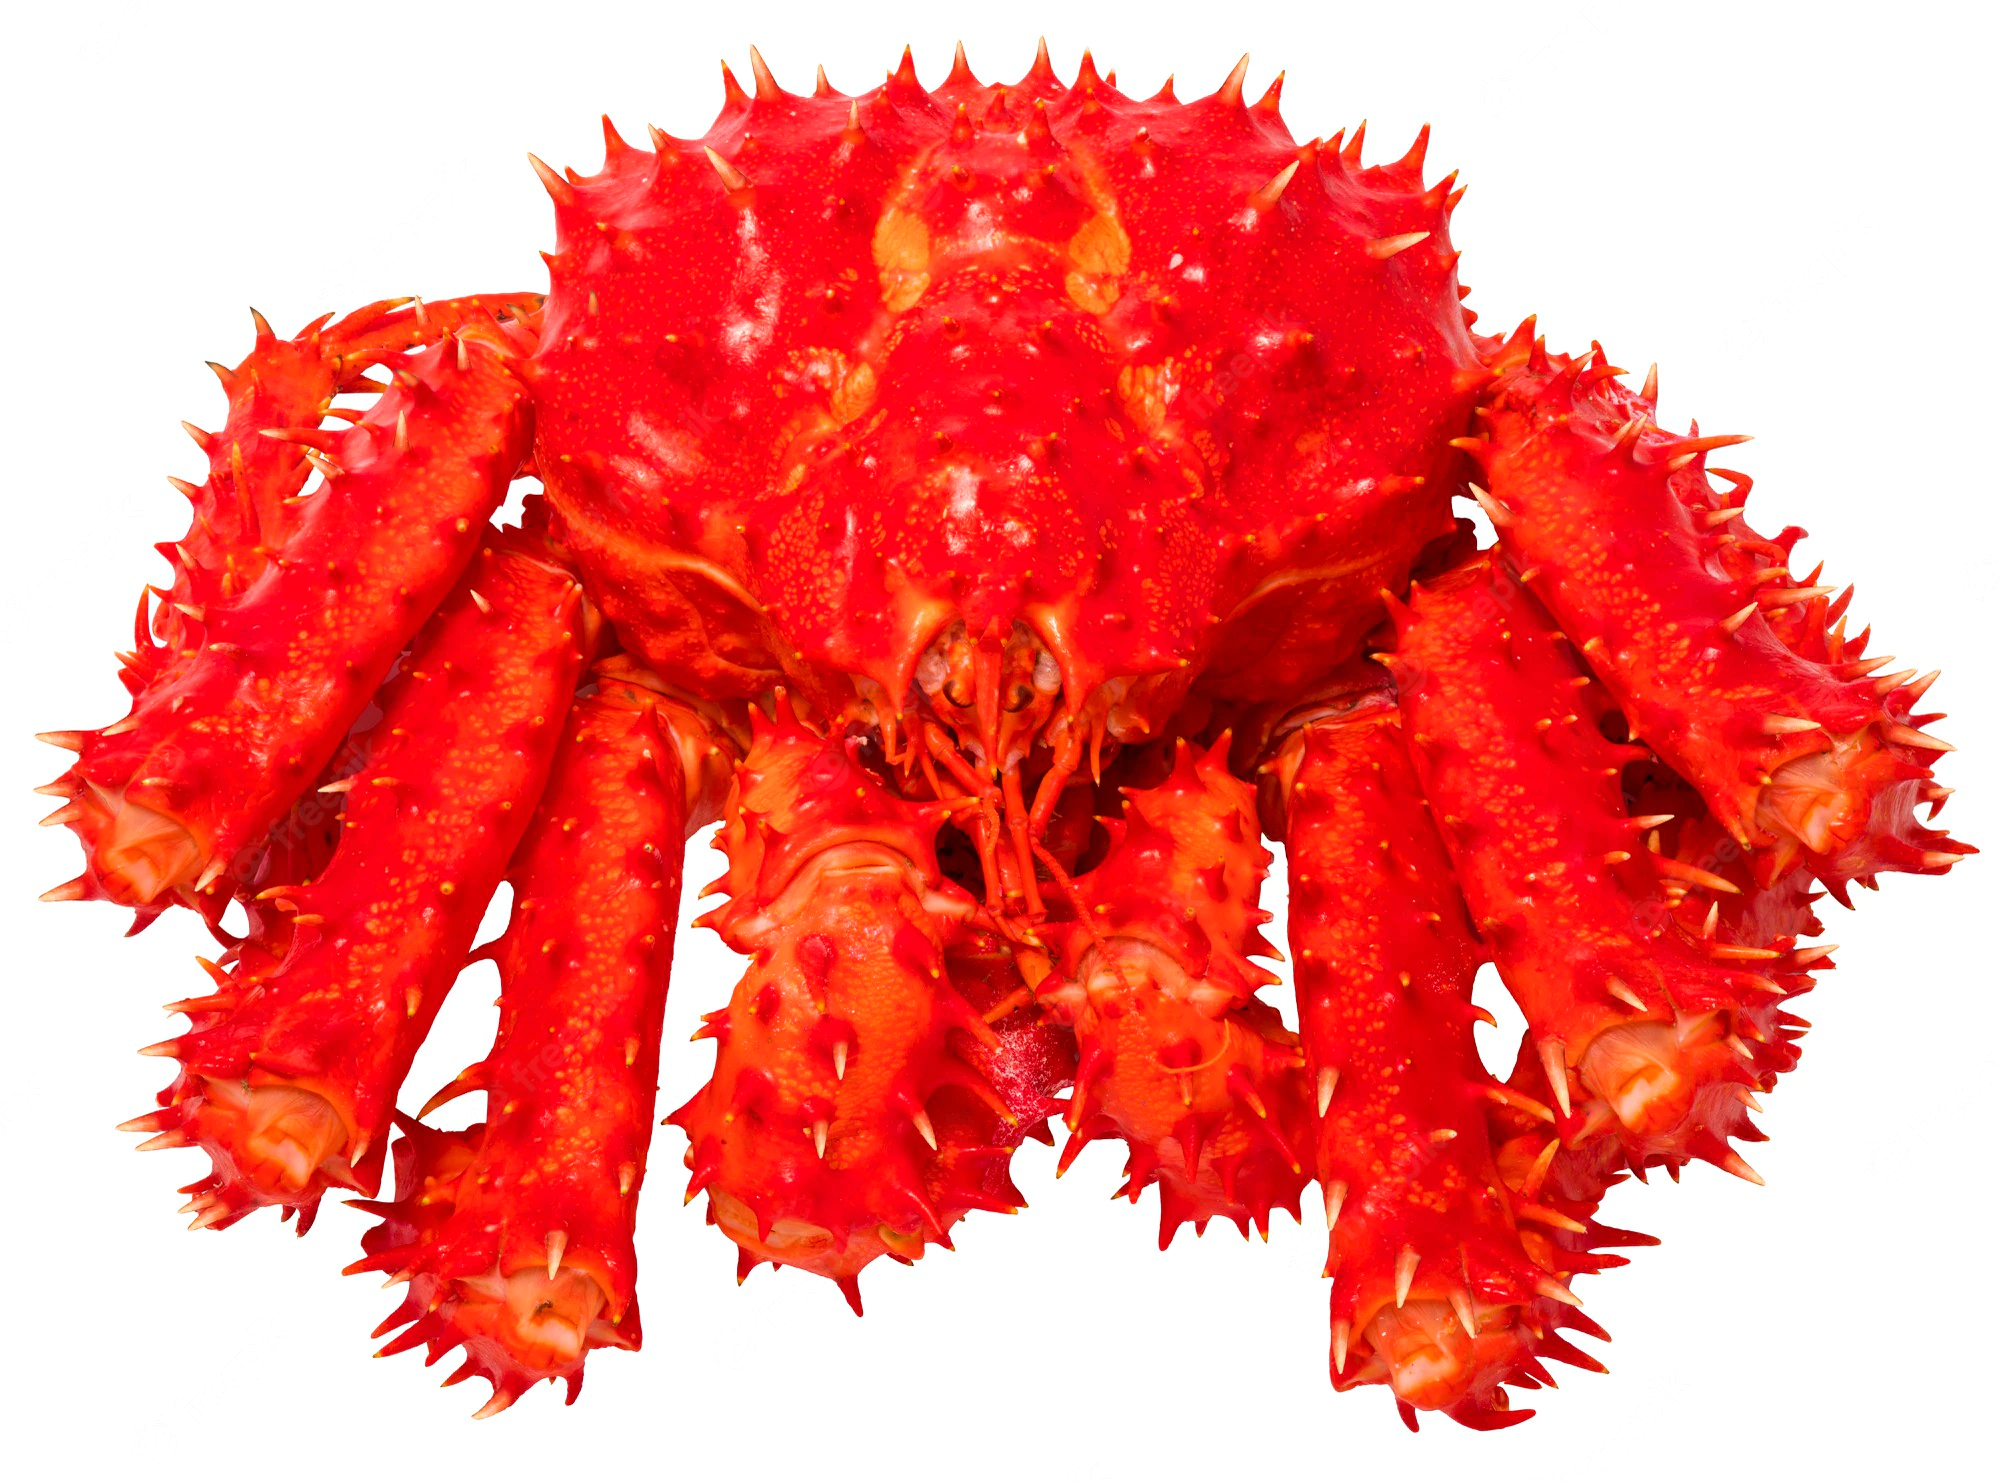 What's the difference between king crab and golden crab